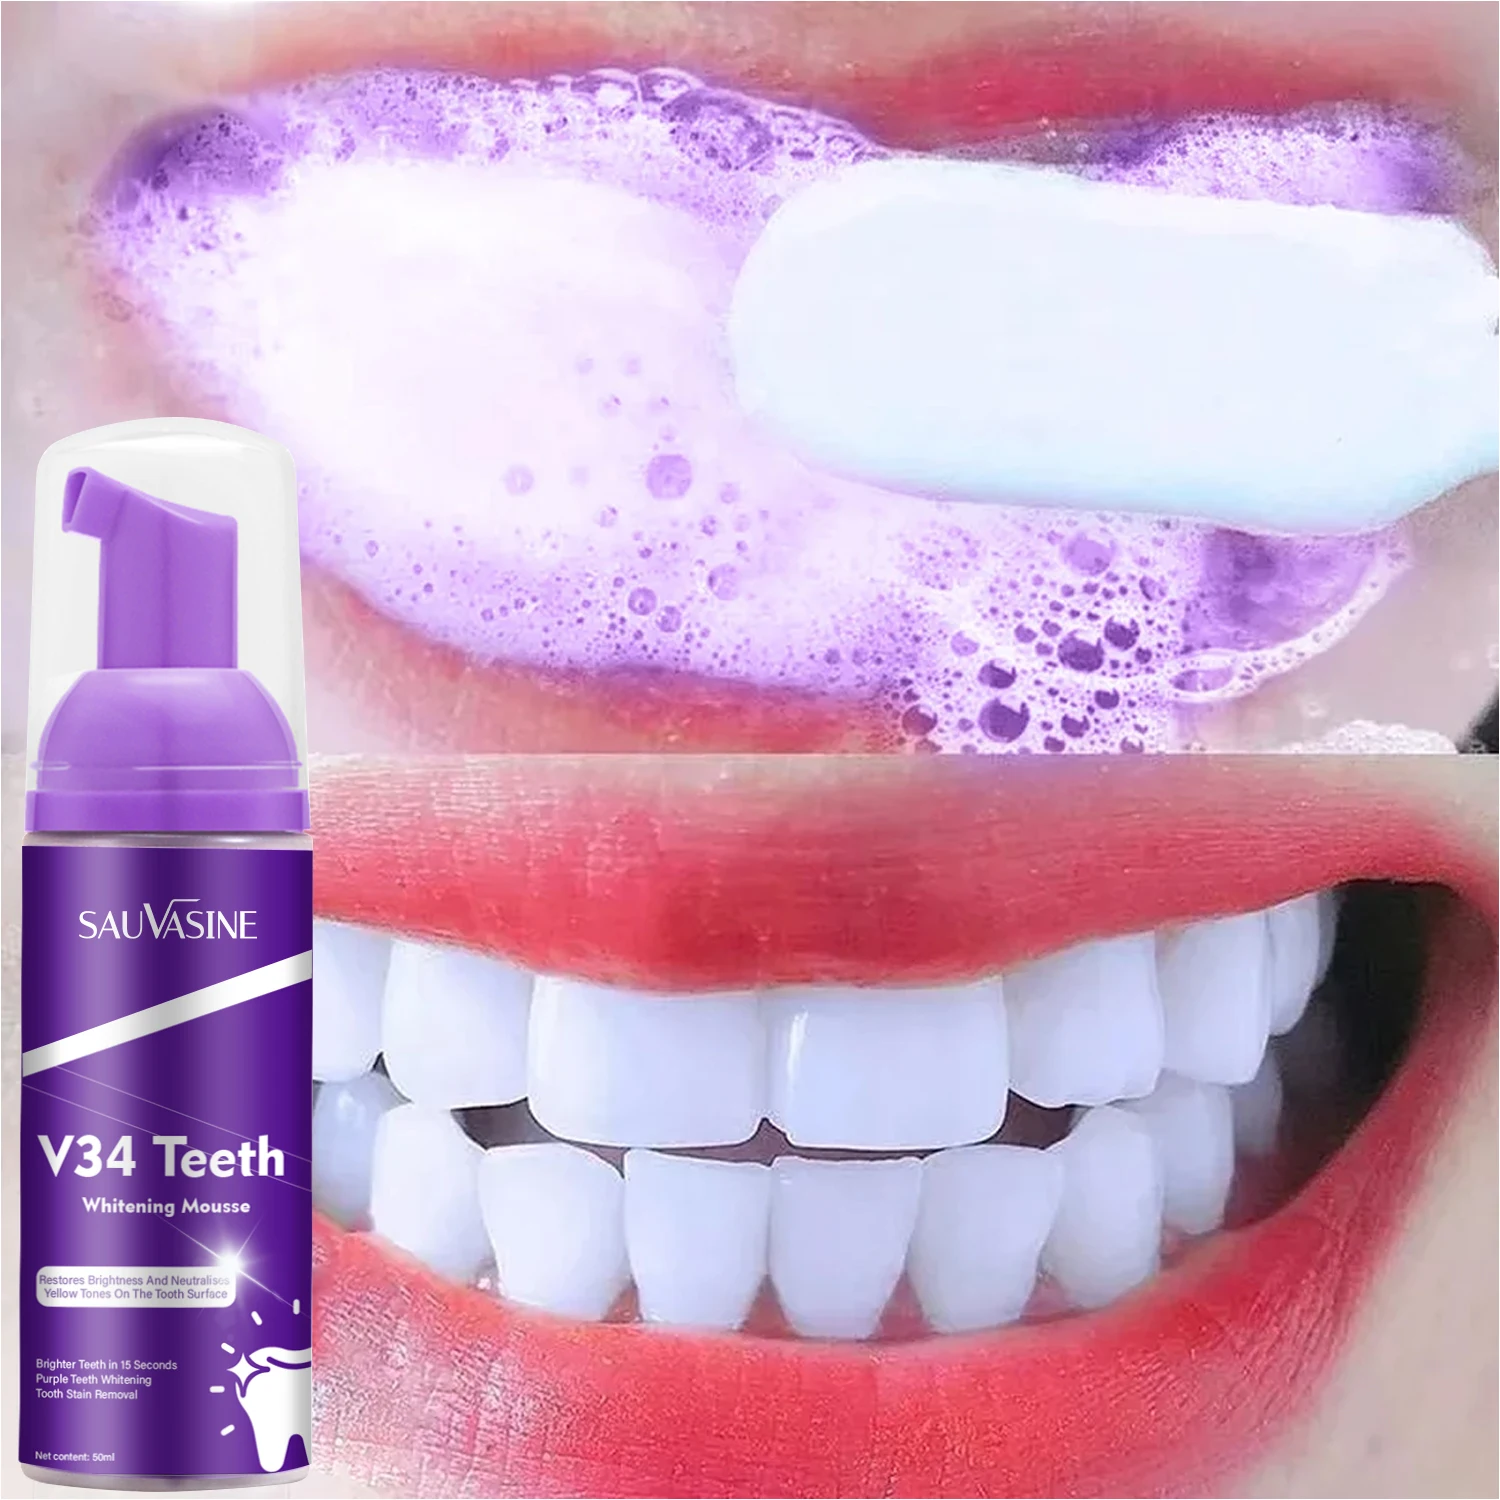 Teeth Whitening Product Effectively Remove Yellow Teeth Smoke Stain Remover Oral Hygiene Clean Dental Plaque Fresh Breath lanbena teeth whitening strips stickers remove plaque stains dental hygiene teeth whitening oral bleaching remove plaque stain